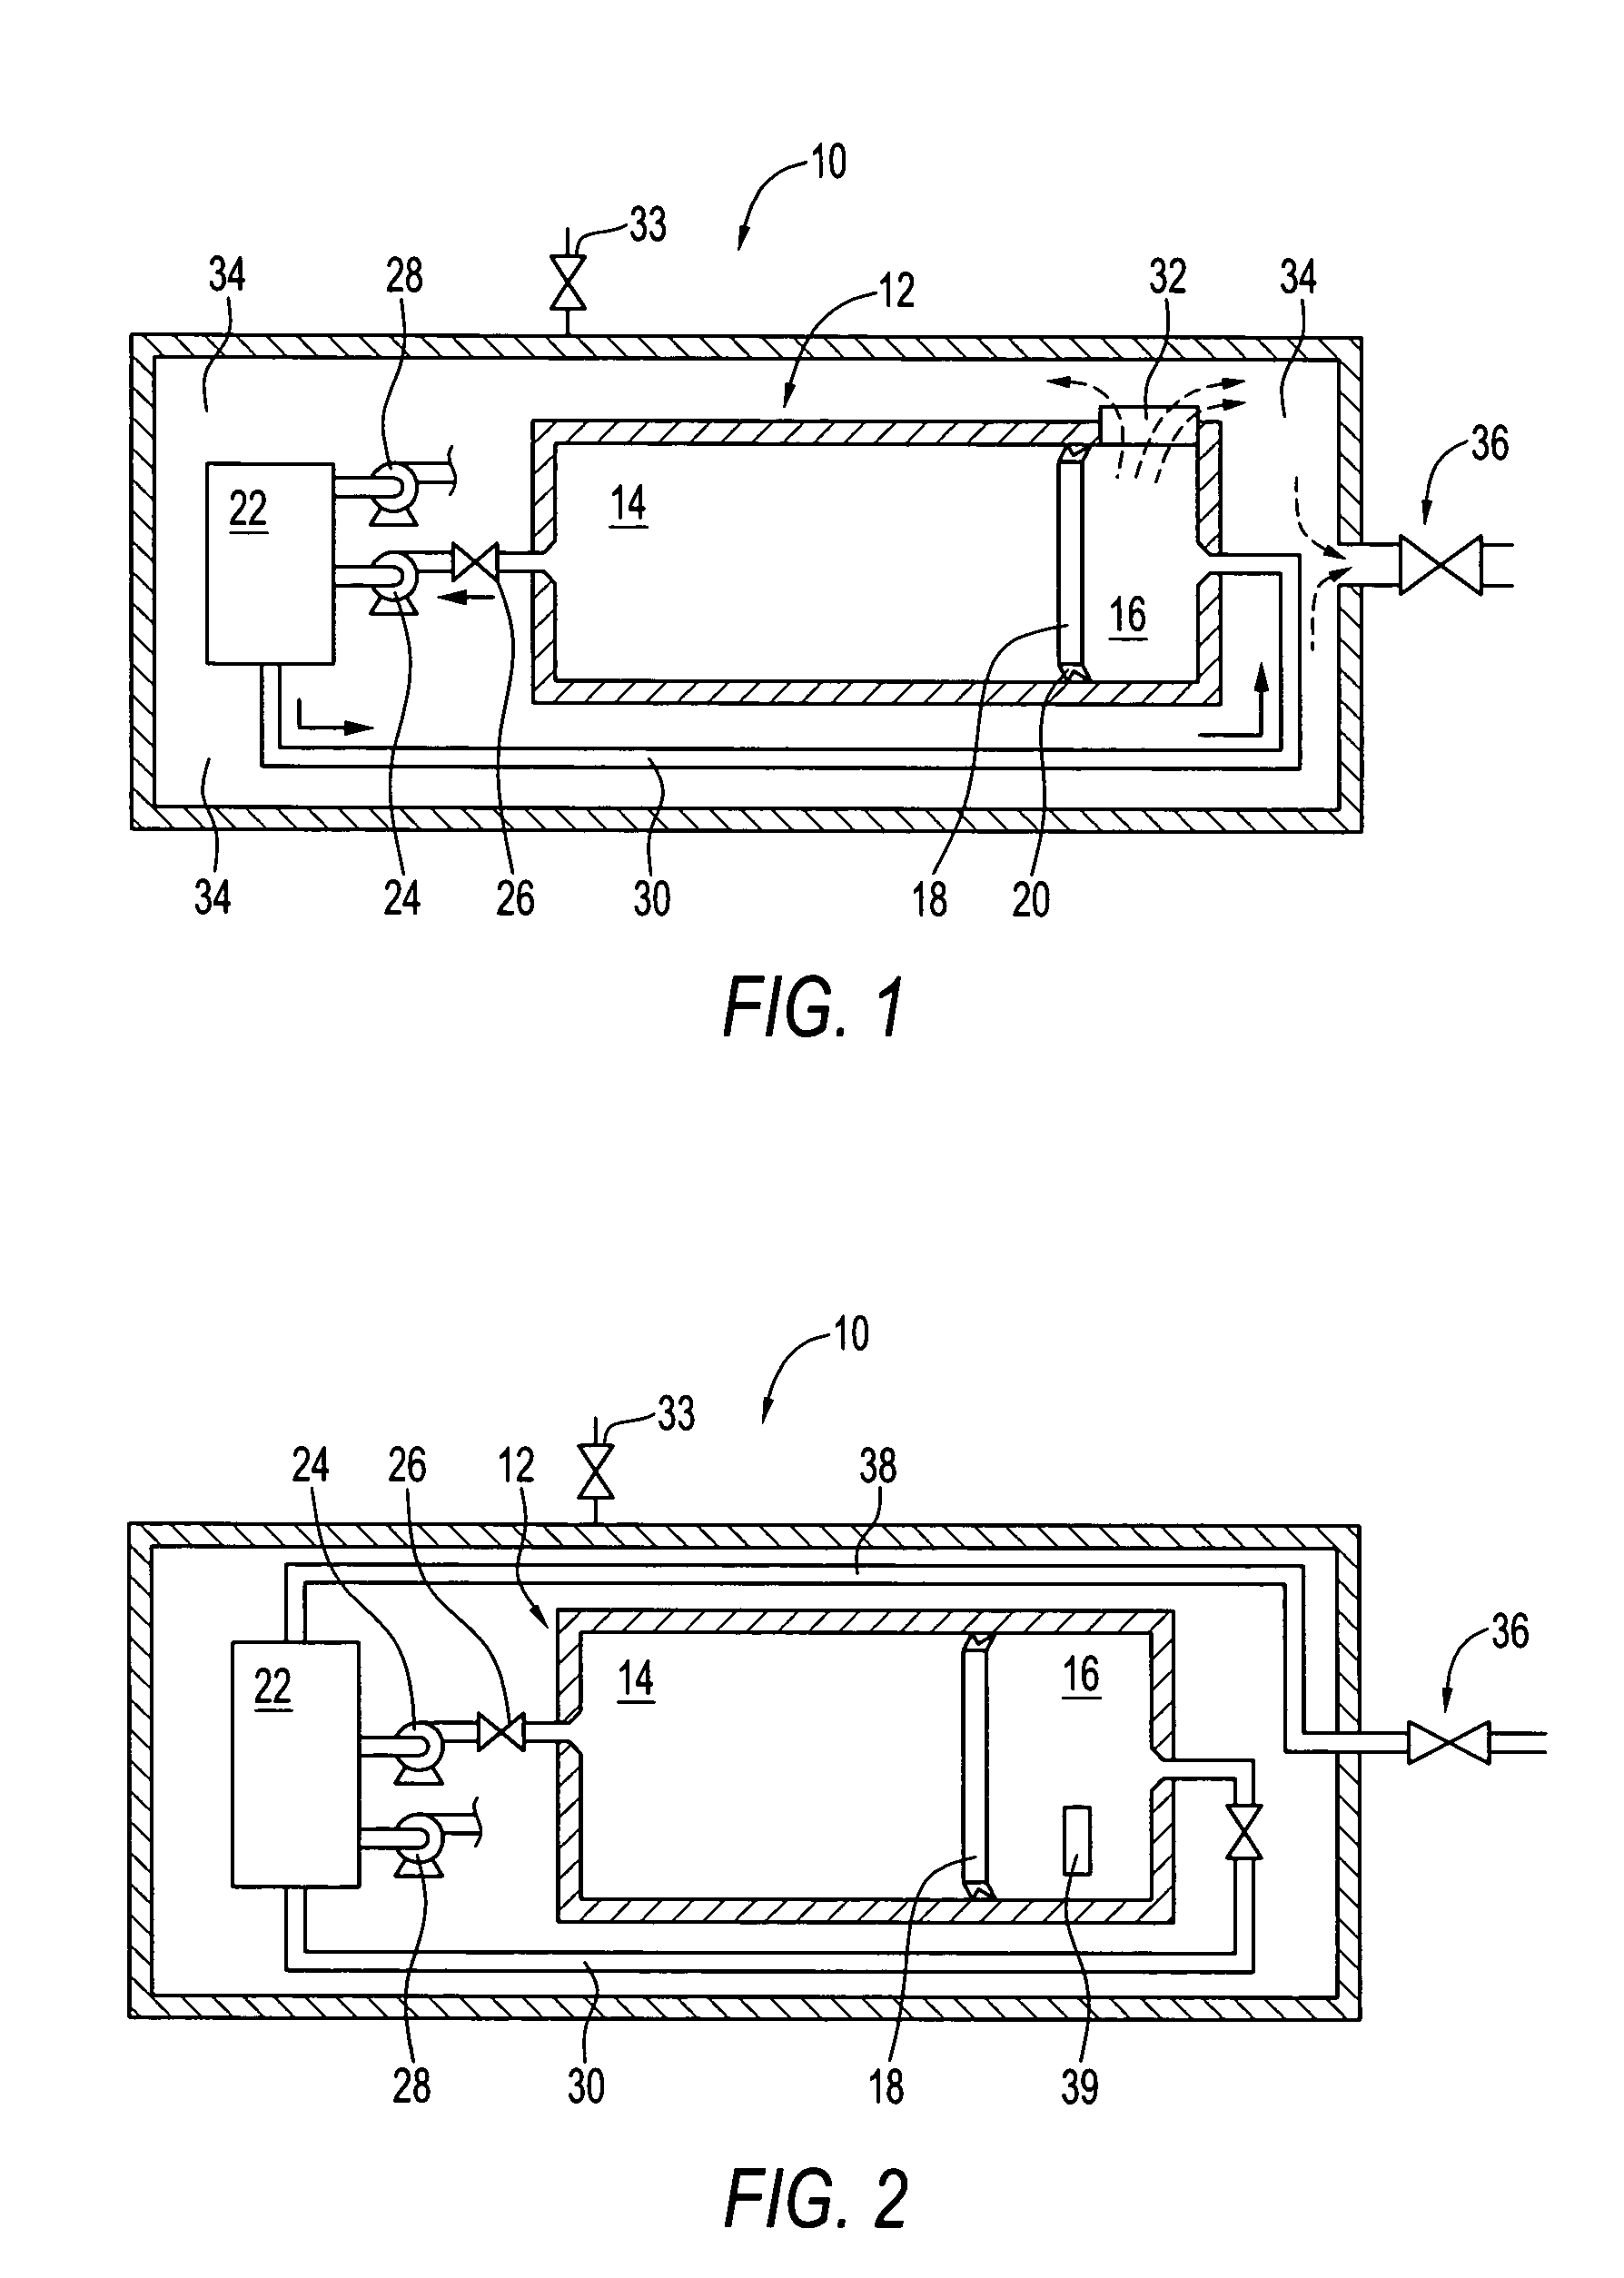 Fuel cartridges for fuel cells and methods for making same